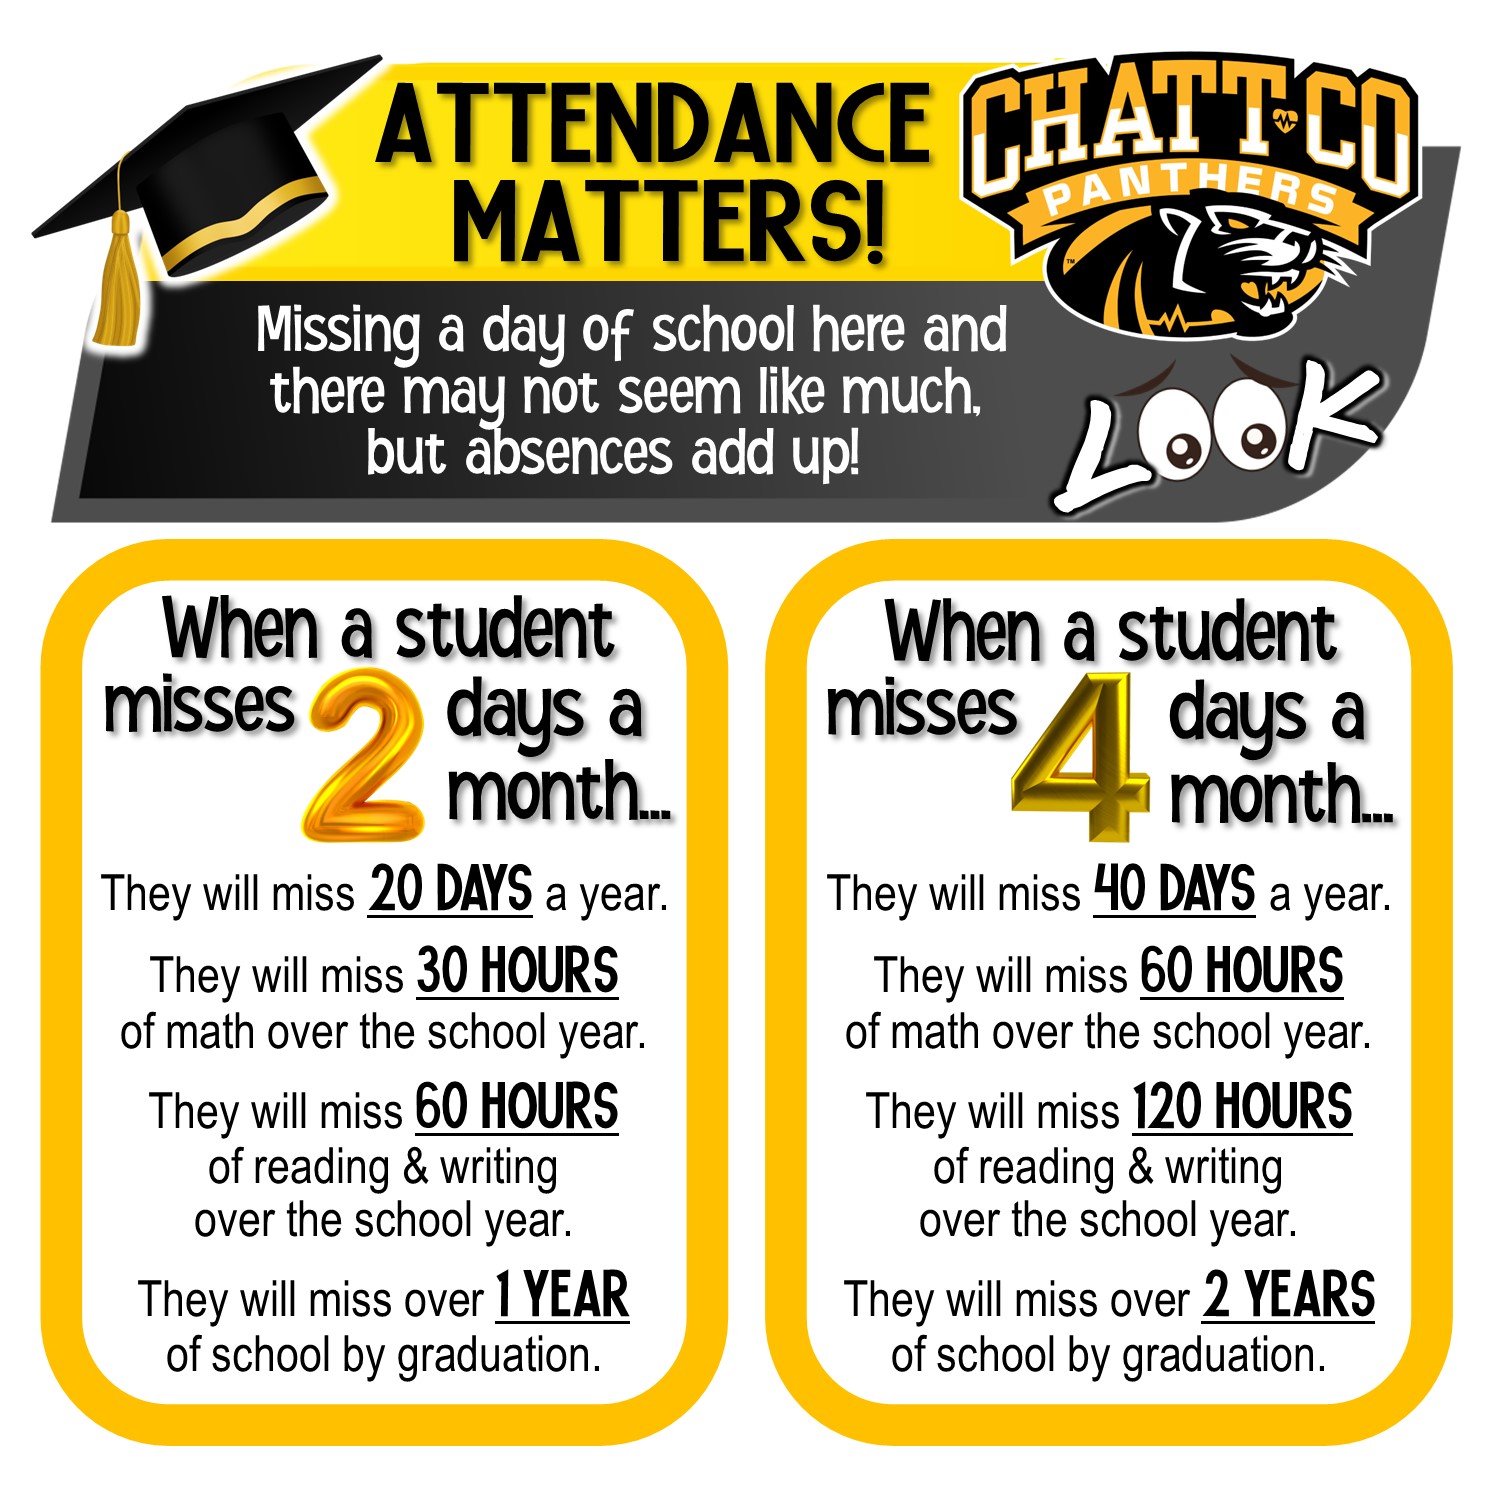 ATTENDANCE MATTERS! Missing a day of school here and there may not seem like much, but absences add up! When a student misses 2 days a month They will miss 20 DAYS a year. They will miss 30 HOURS of math over the school year. They will miss 60 HOURS of reading & writing over the school year. They will miss over 1 YEAR of school by graduation. When a student misses 4 days a month… They will miss 40 DAYS a year They will miss 60 HOURS of math over the school year. They will miss 120 HOURS of reading & writing over the school year. They will miss over 2 YEARS of school by graduation.